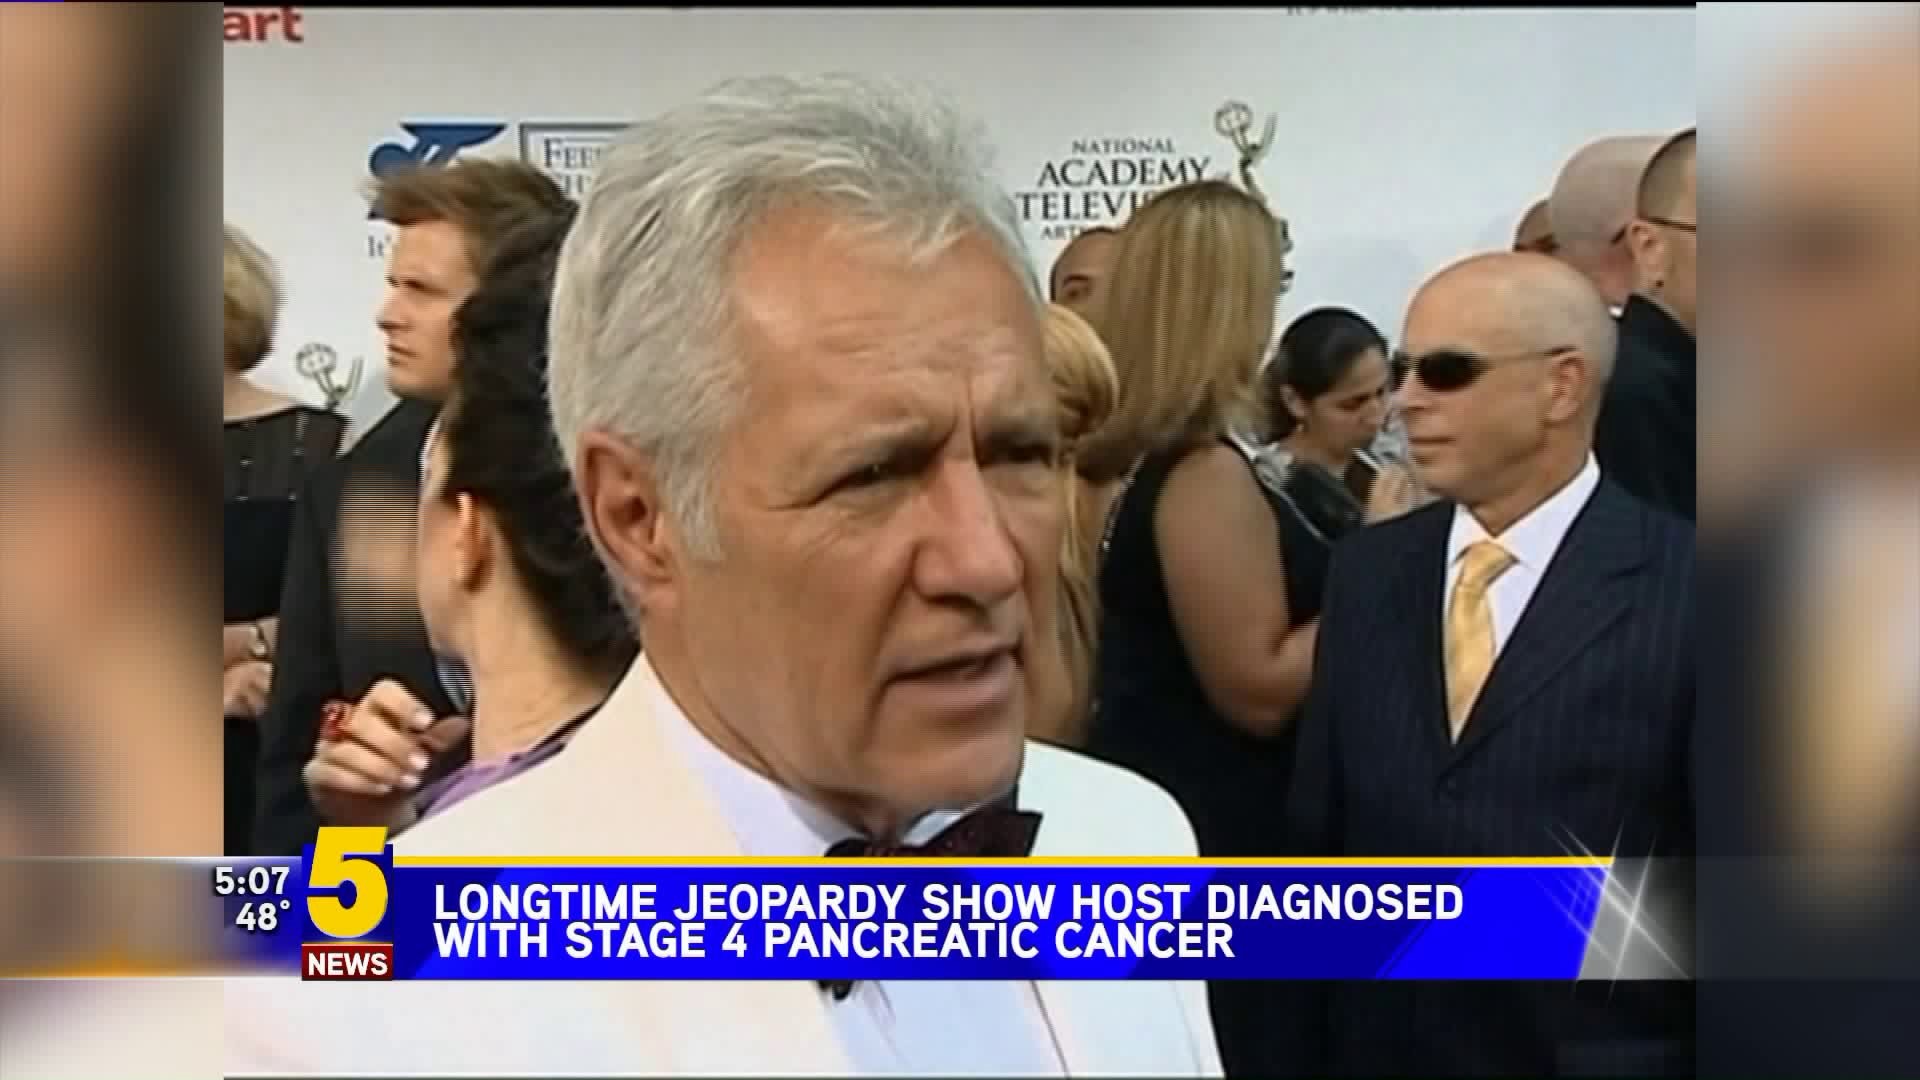 Longtime Jeopardy Show Host Diagnosed With Stage 4 Pancreatic Cancer